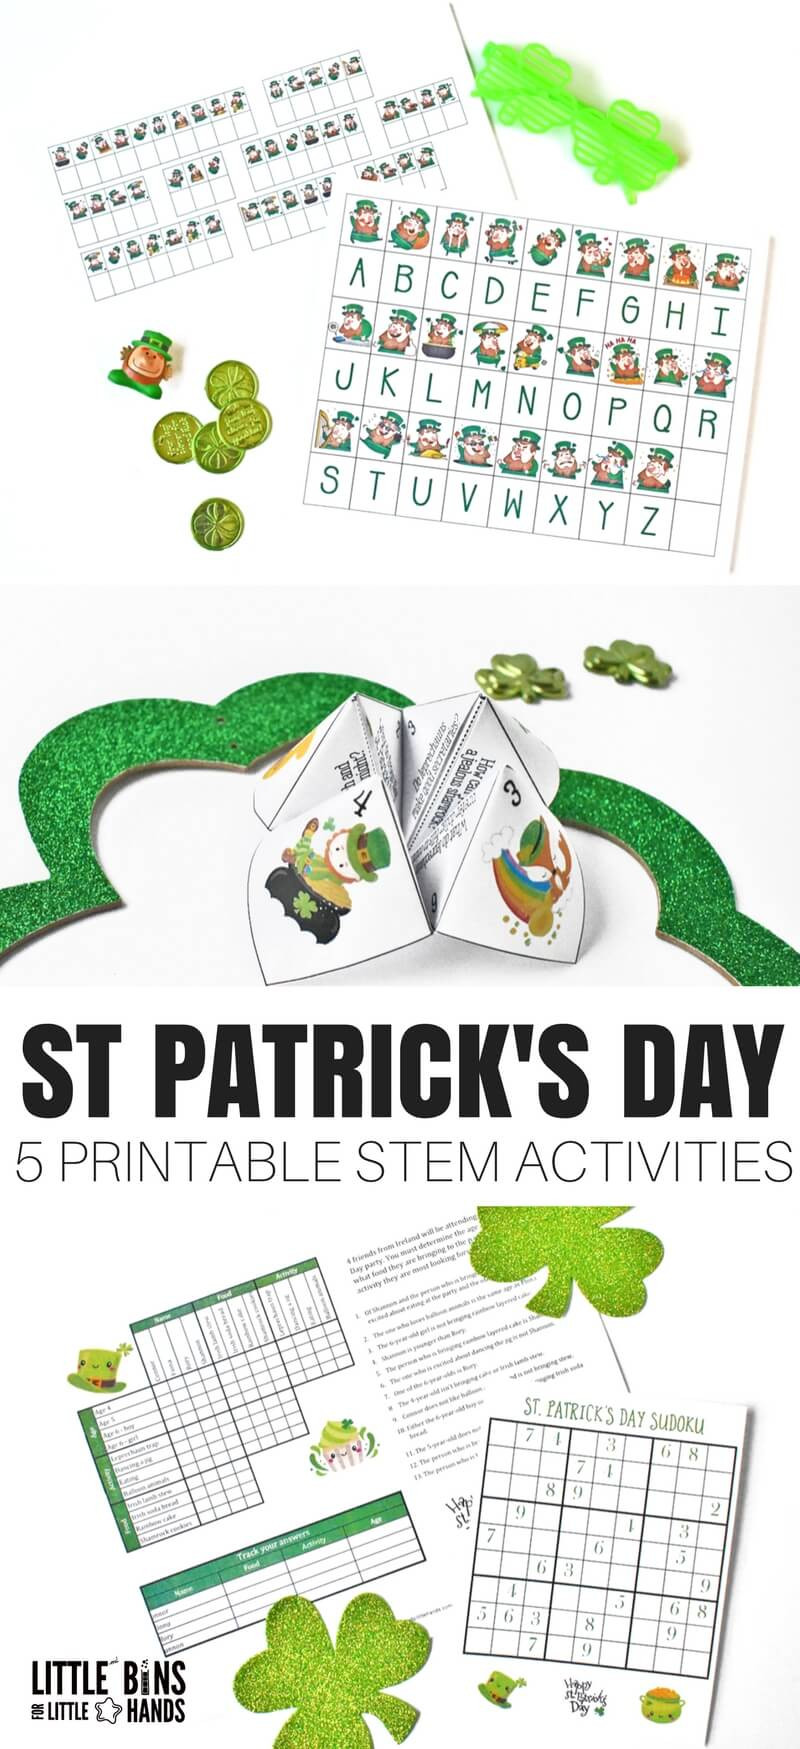 Fun St Patrick's Day Activities Printable St Patricks Day STEM Activities for Kids FREE